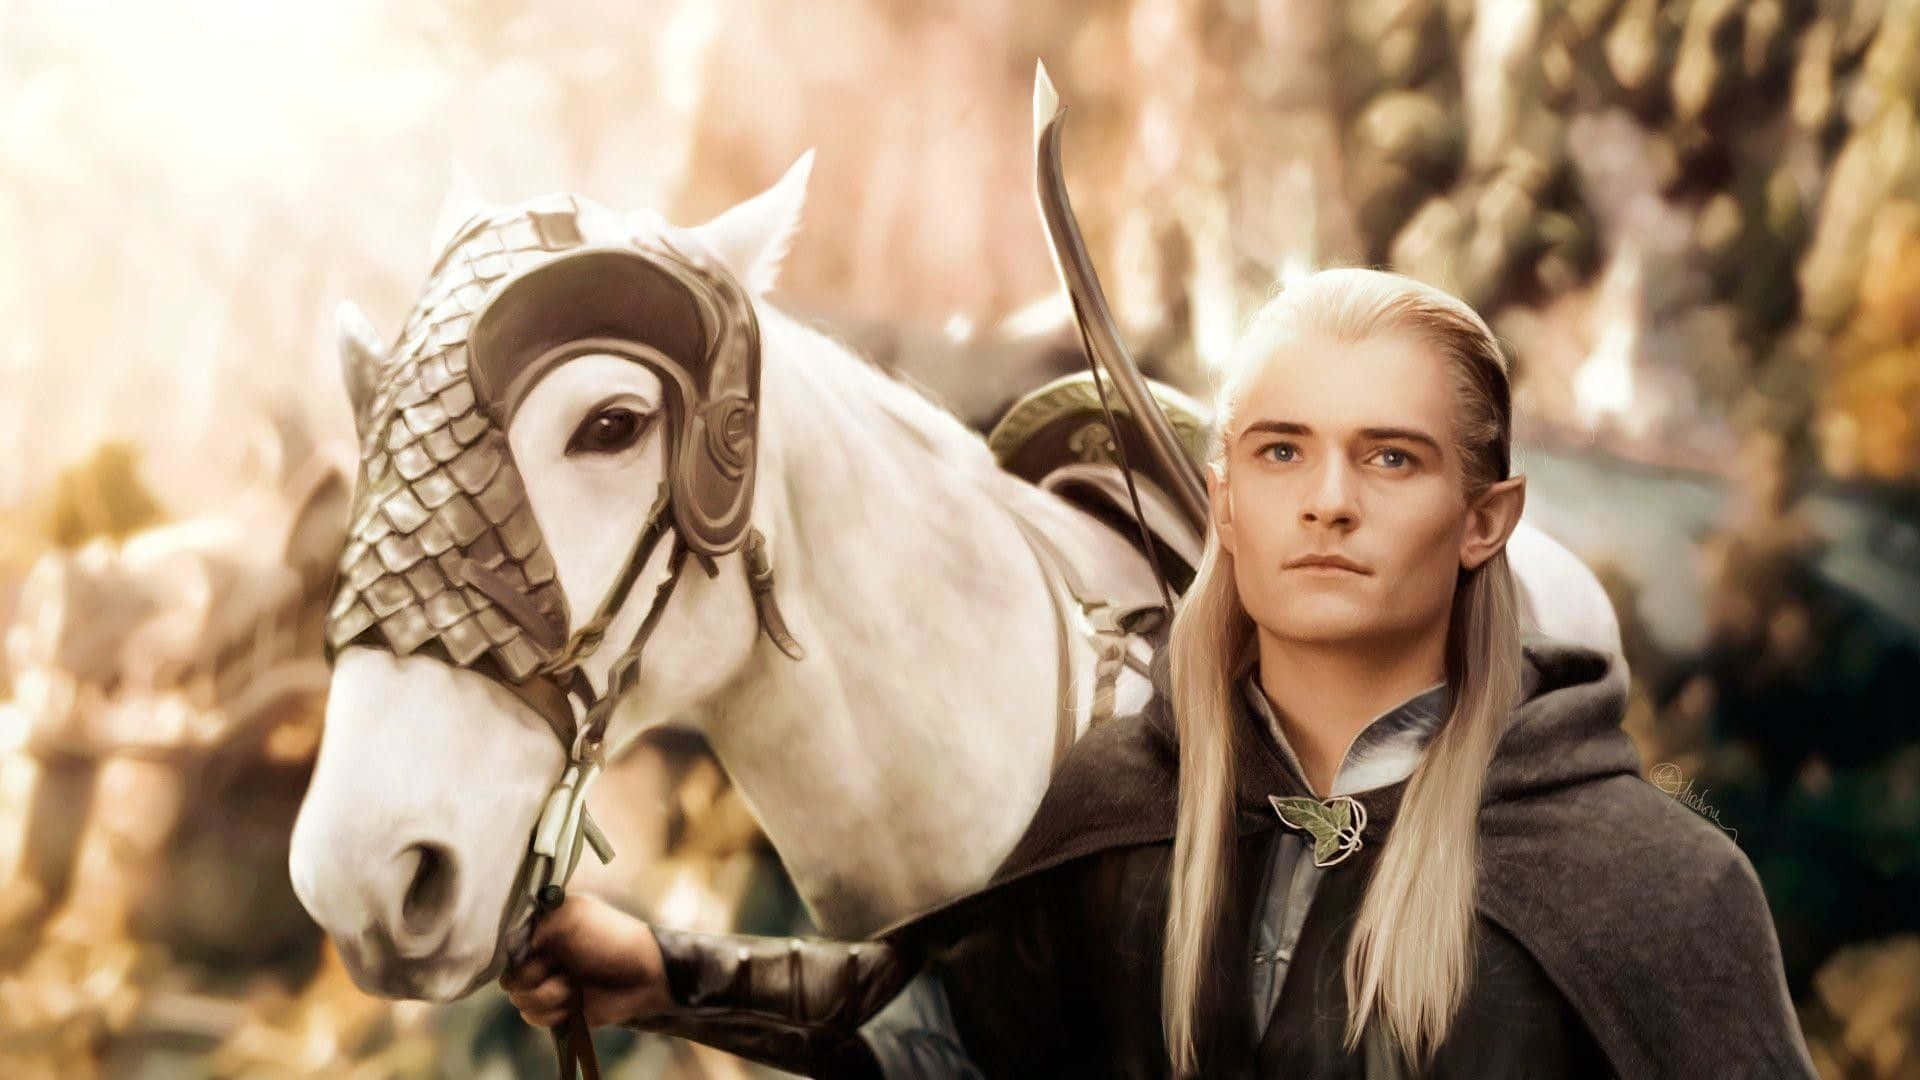 Legolas, a beloved character from the Lord of the Rings trilogy. Wallpaper